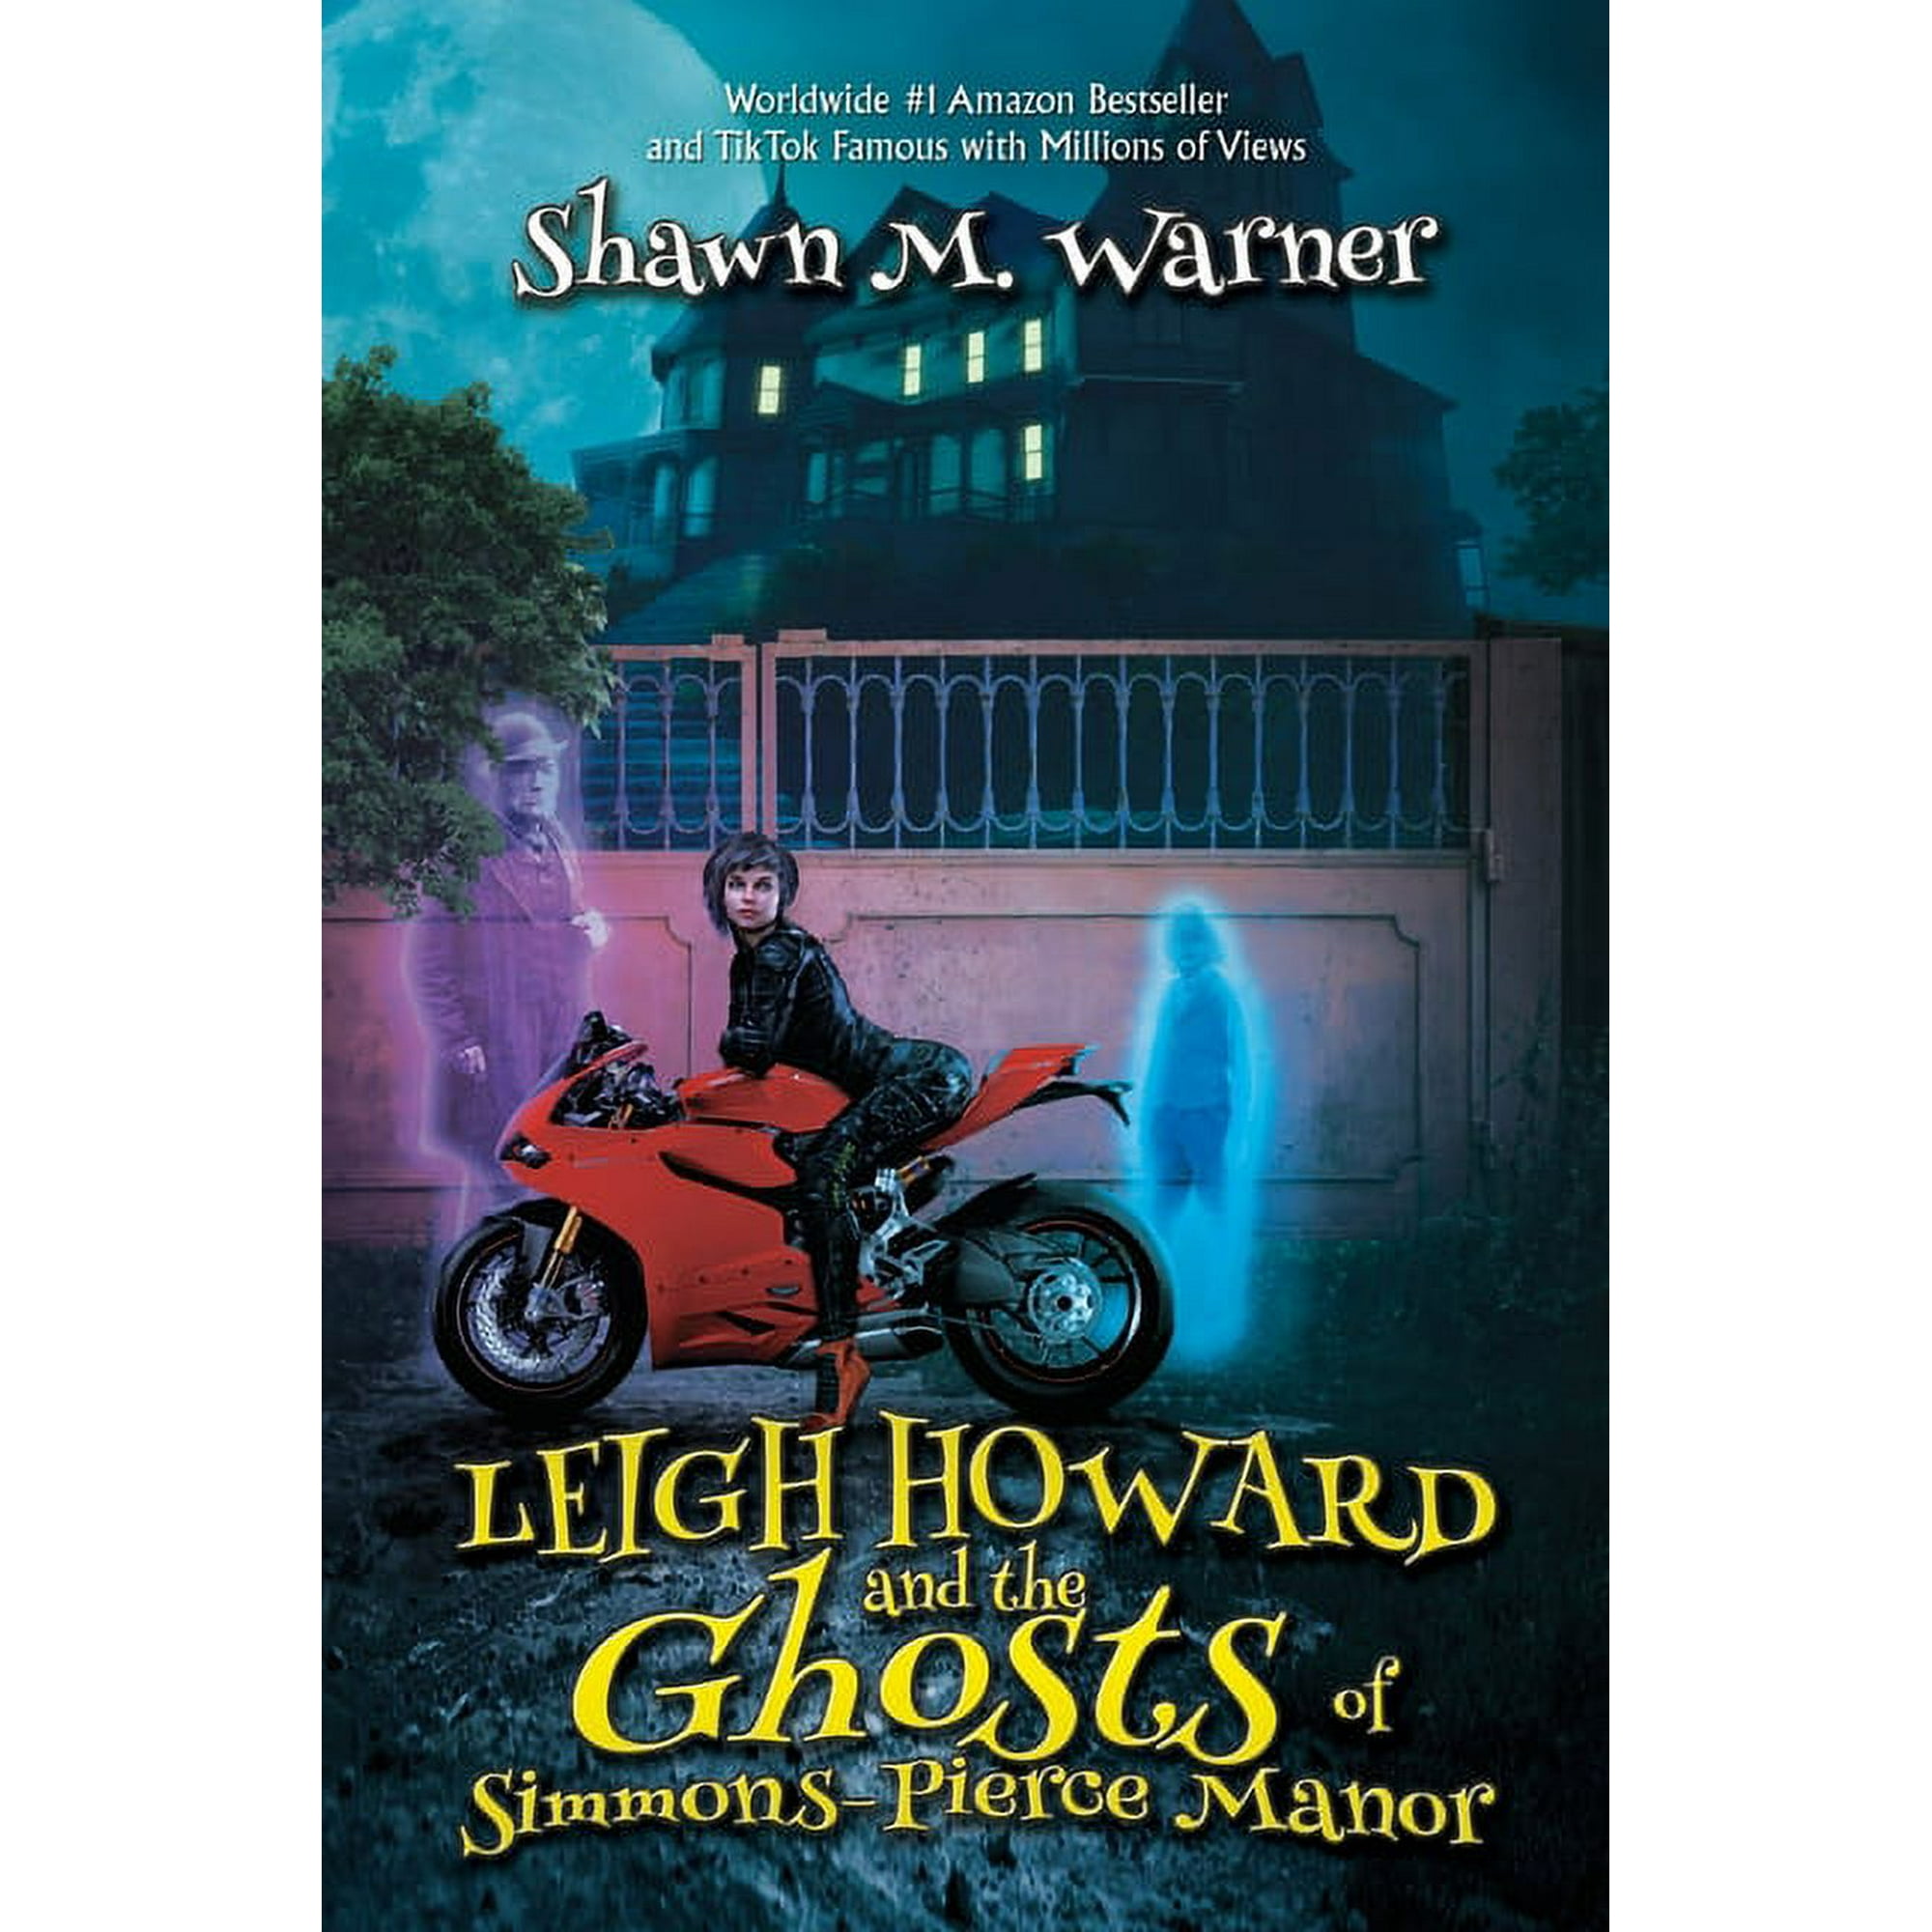 Leigh Howard and the Ghosts of Simmons-Pierce Manor (Paperback ...